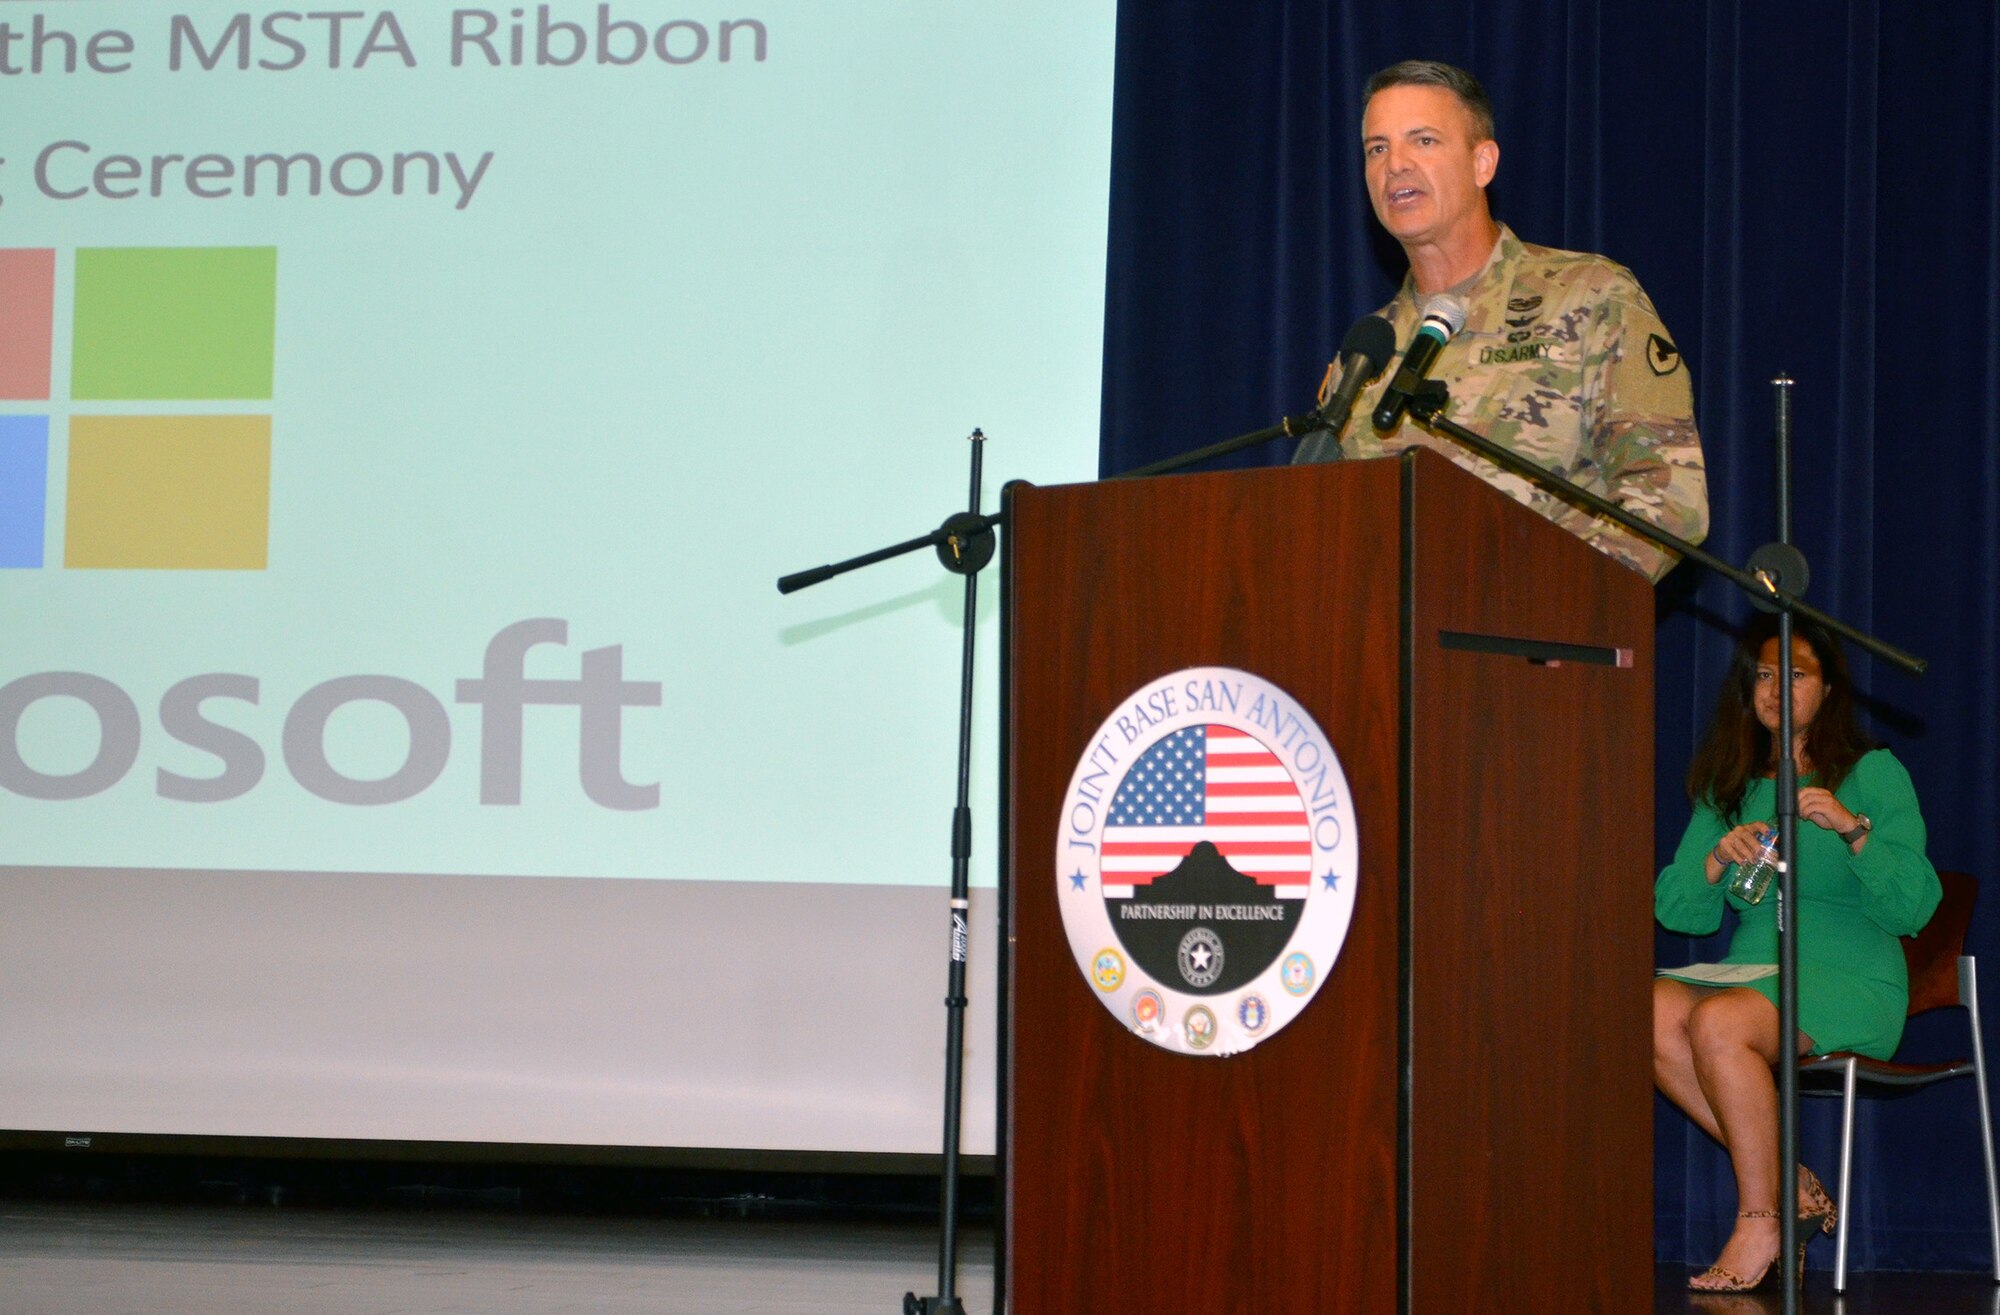 Col. Peter Velesky, Joint Base San Antonio and 502nd Air Base Wing deputy commander, delivers remarks at a ribbon-cutting ceremony for the establishment of the Microsoft Military Spouse Technology Academy program in San Antonio at the JBSA-Fort Sam Houston Military & Family Readiness Center Sept. 27. Velesky spoke about the positive impact the training program will have for military spouses who are seeking a career in the technology field.